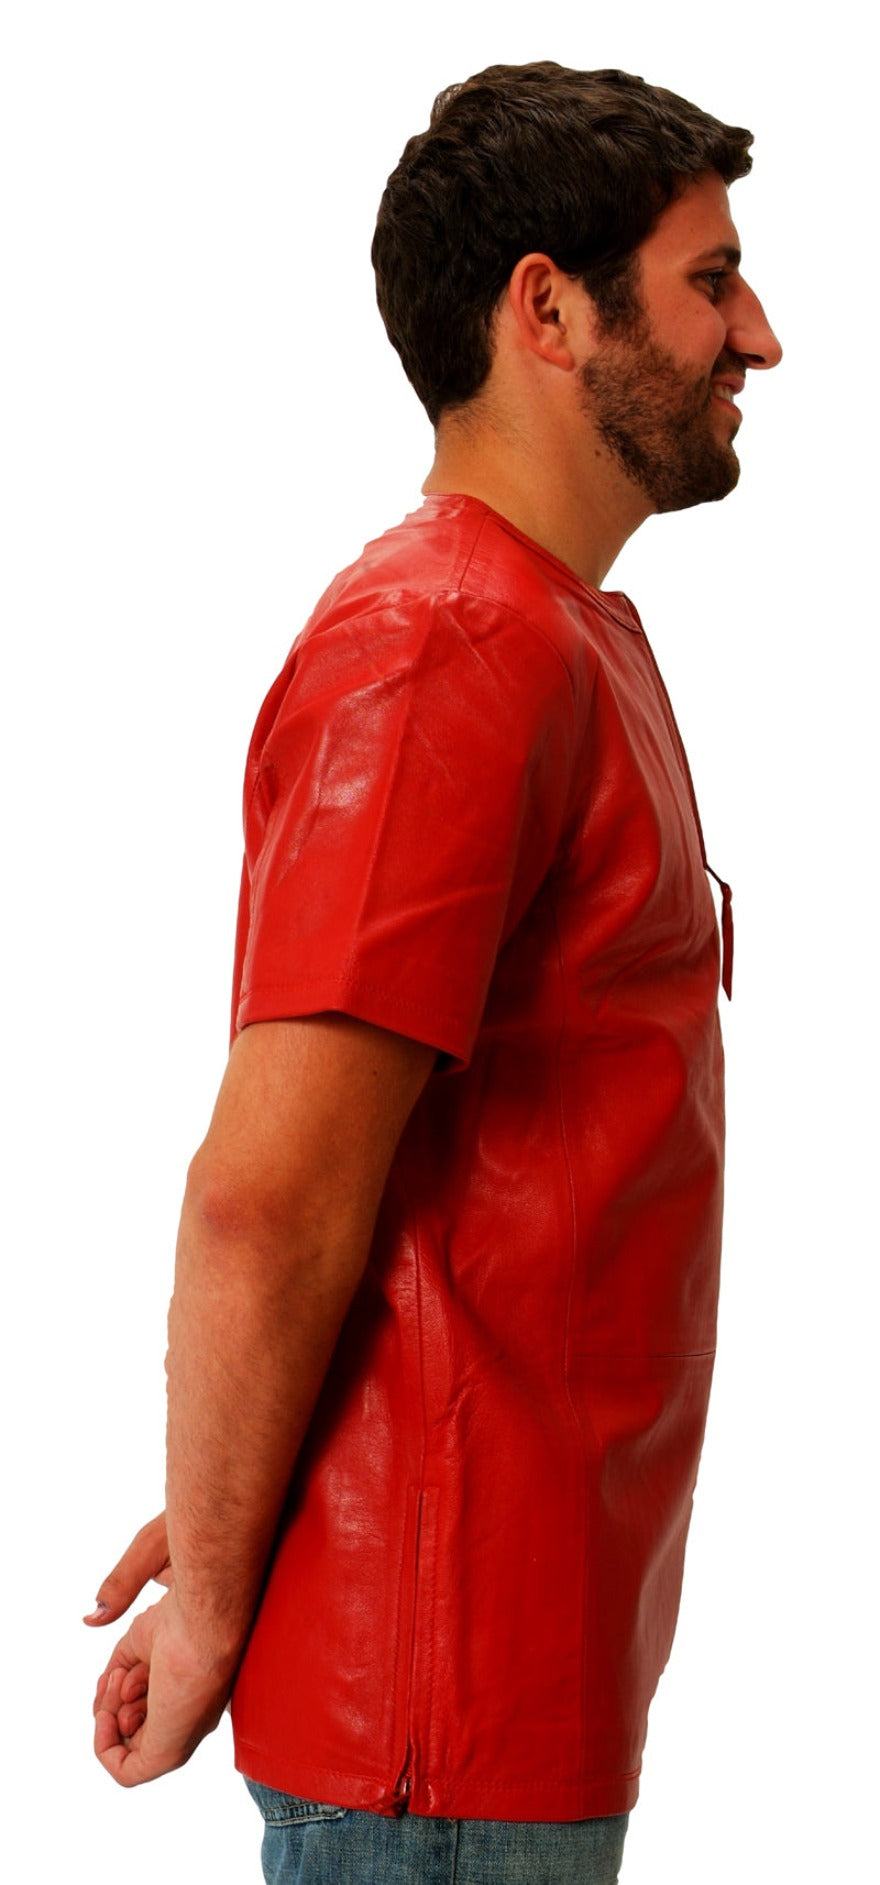 Picture of model wearing a red leather t shirt, side view.